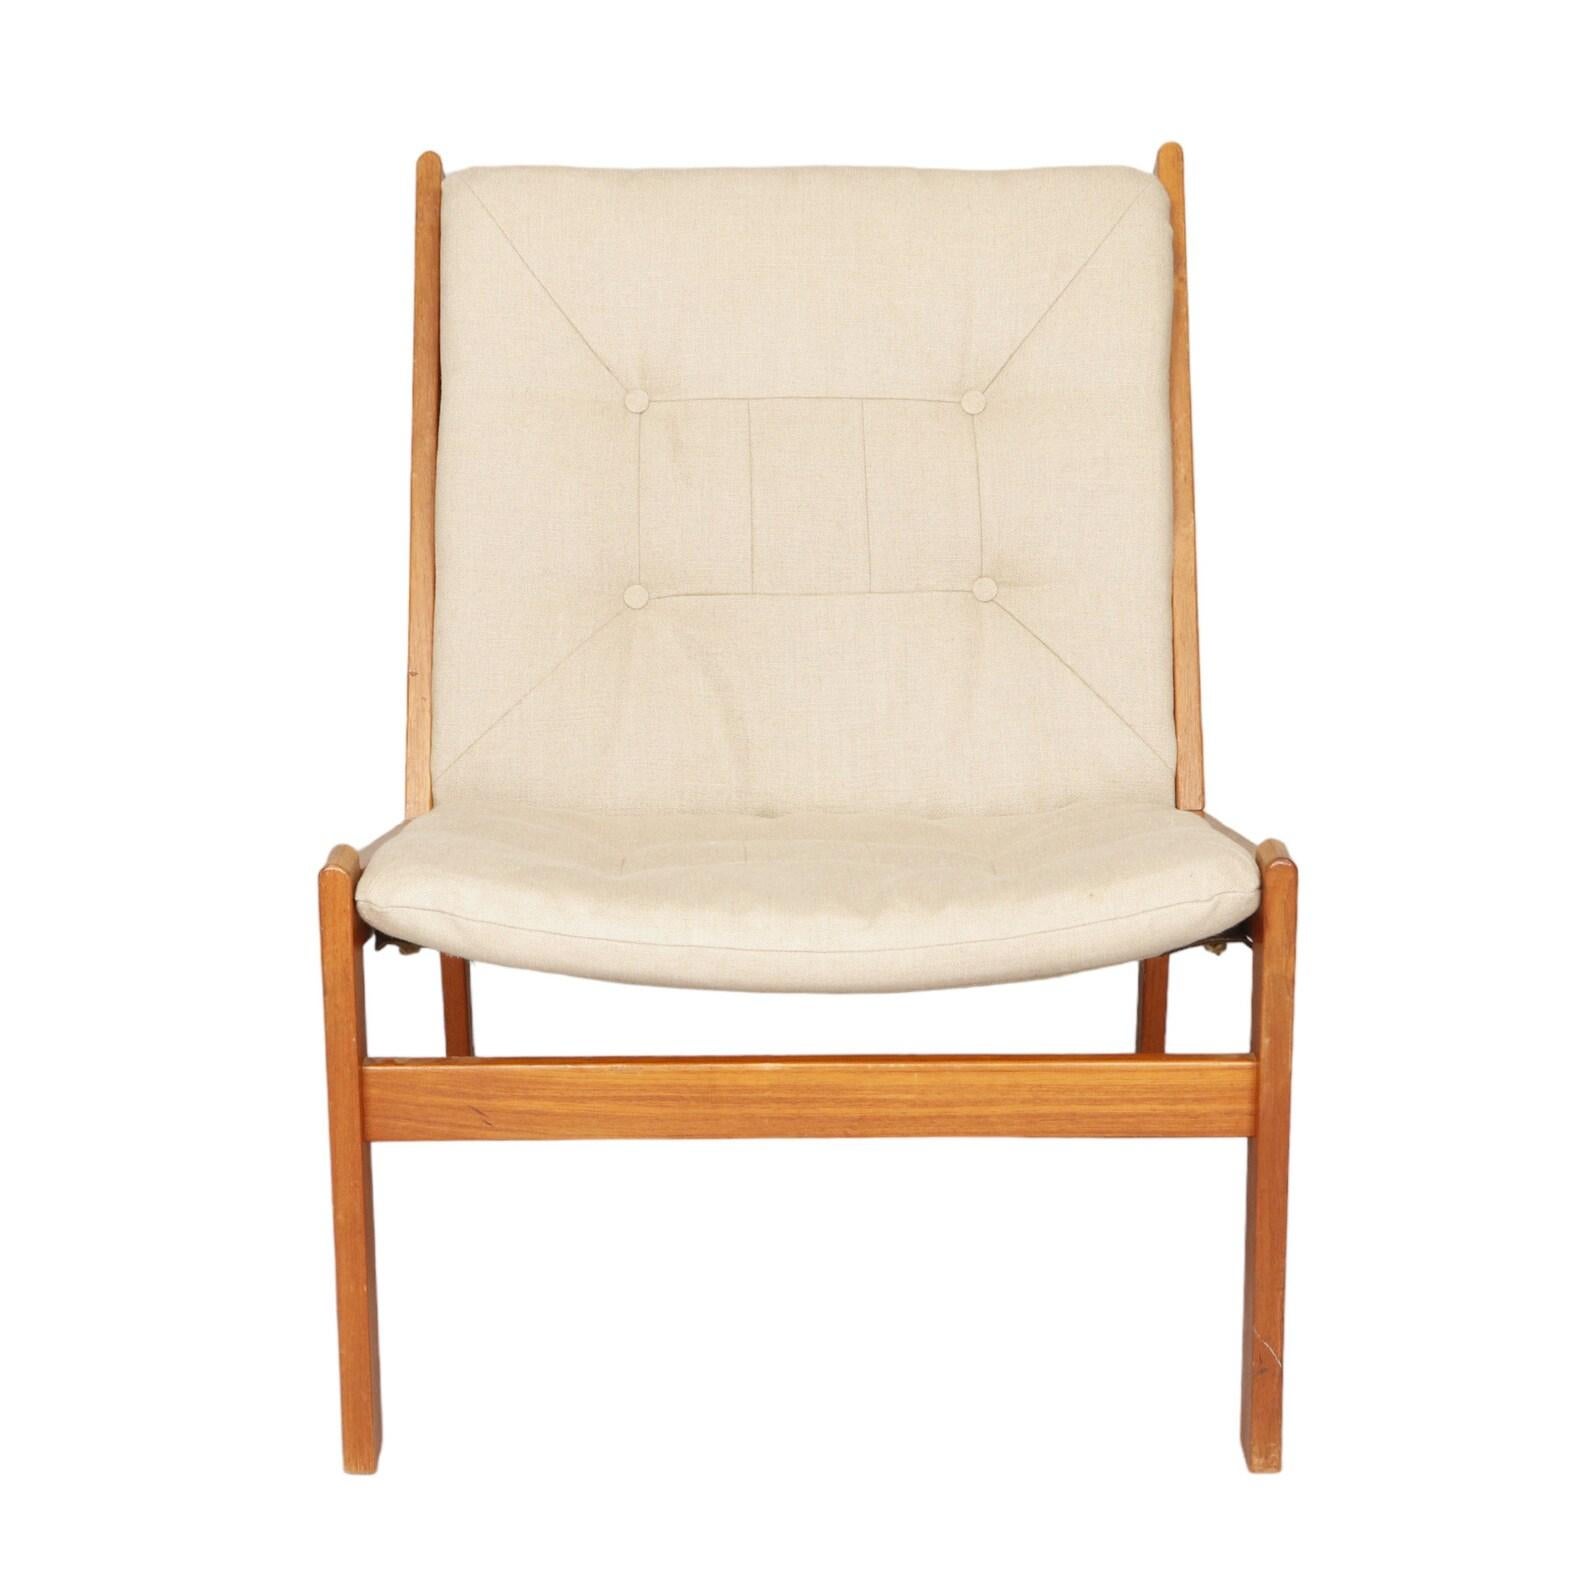 Mid-Century Hunters chair ThorbjÃ¸rn Alfdal 1960's

W25 x D30 x 29H
Condition: good

original upholstery